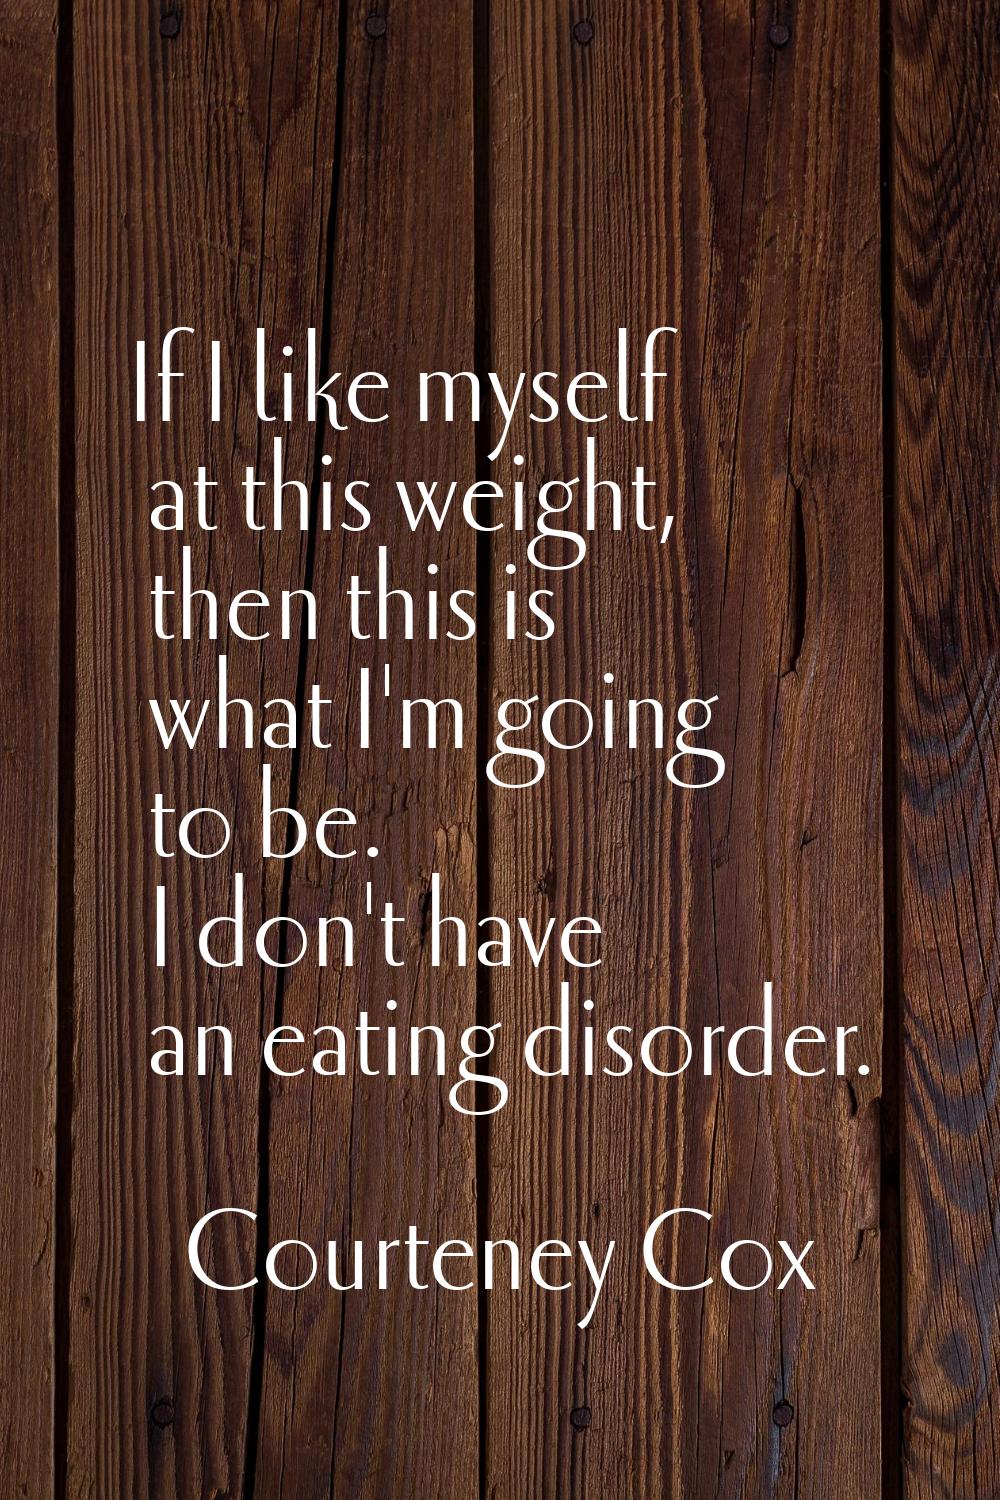 If I like myself at this weight, then this is what I'm going to be. I don't have an eating disorder